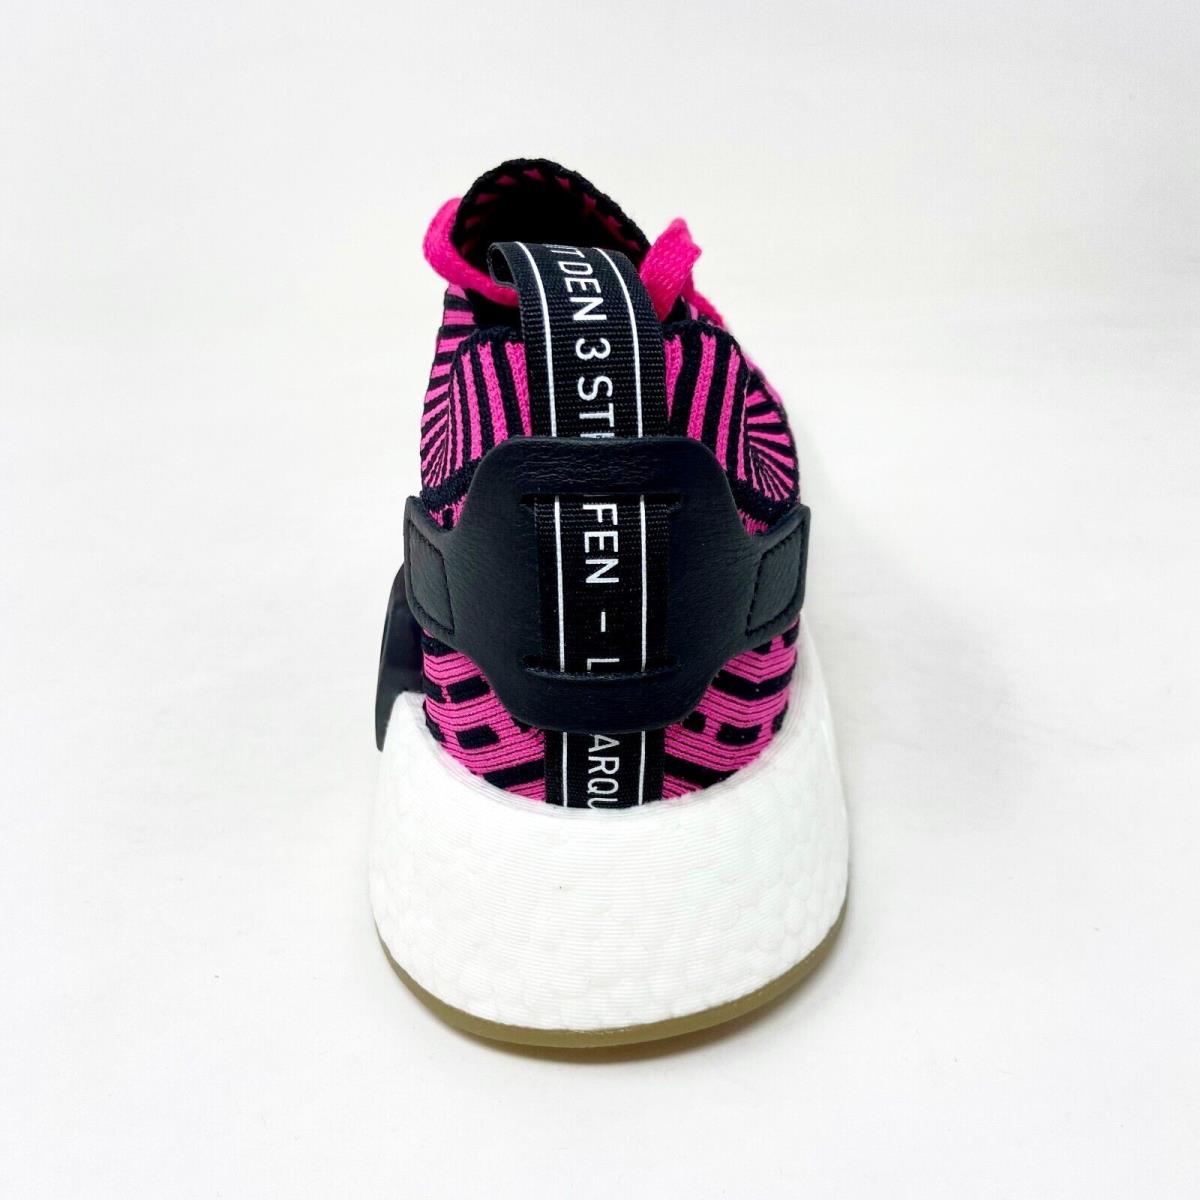 Adidas shoes NMD - Pink 3